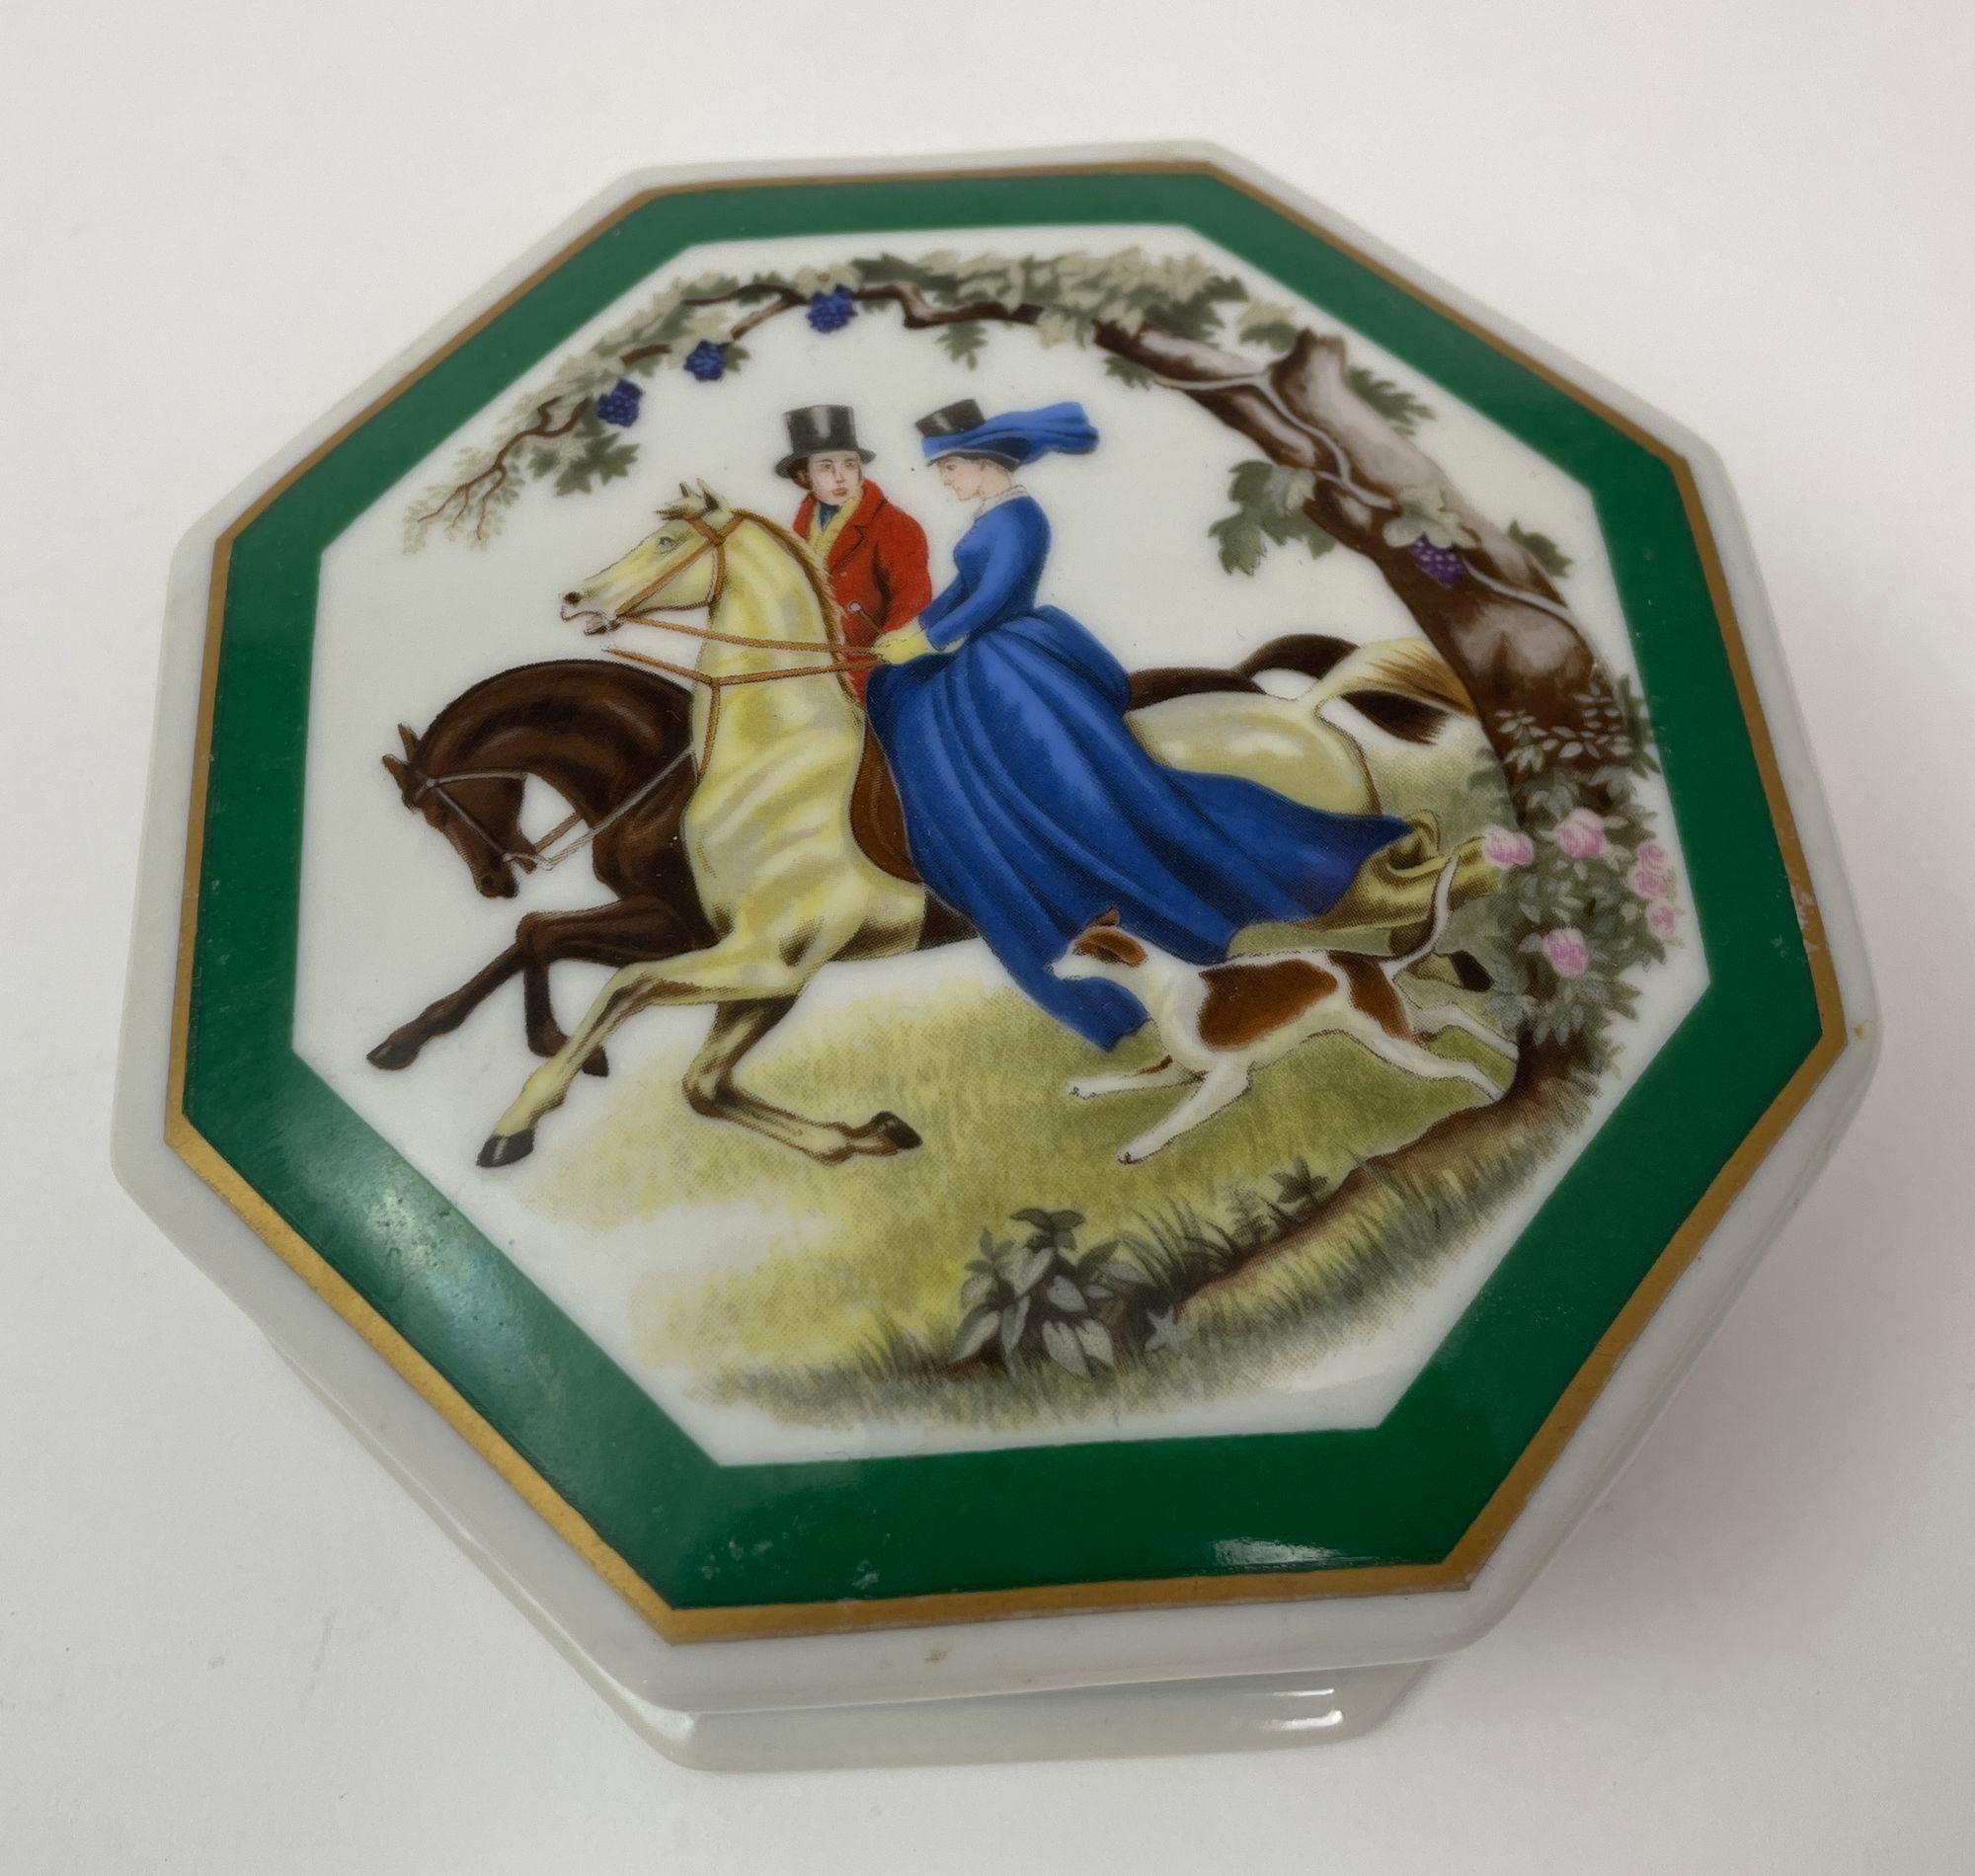 Elizabeth Arden Porcelain Box Southern Heirlooms Made In Japan In Good Condition For Sale In North Hollywood, CA